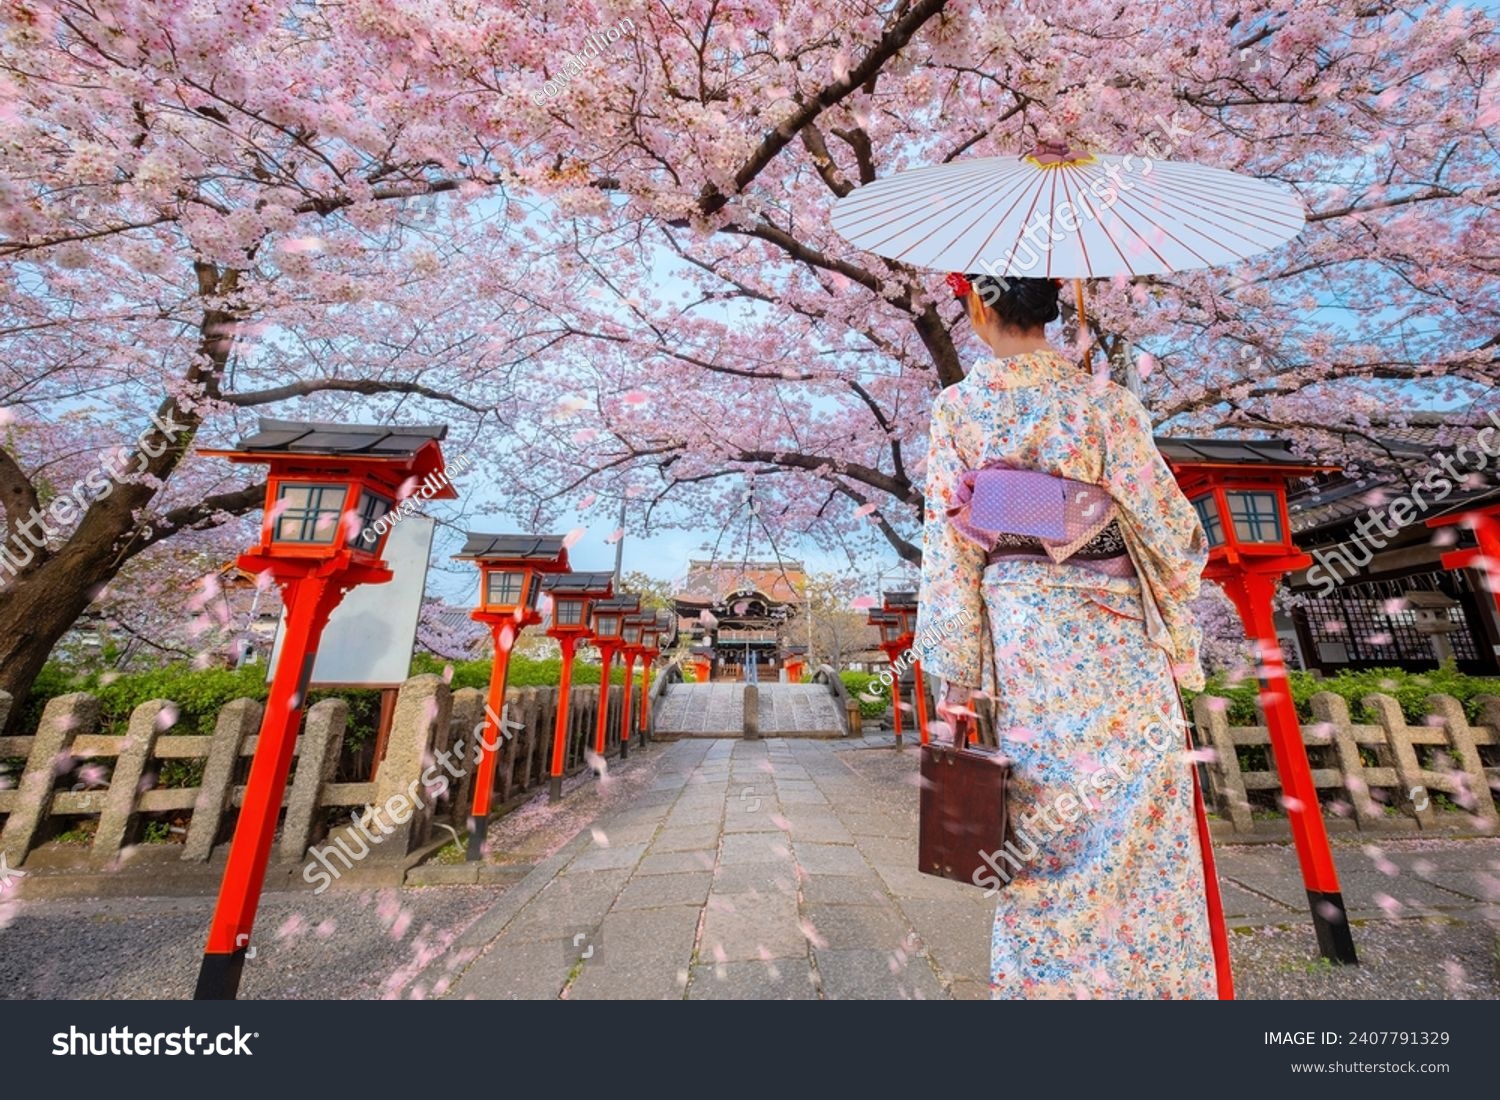 Young Japanese woman in traditional Kimono dress at Rokusonno shrine during full bloom cherry blossom period in Kyoto, Japan #2407791329